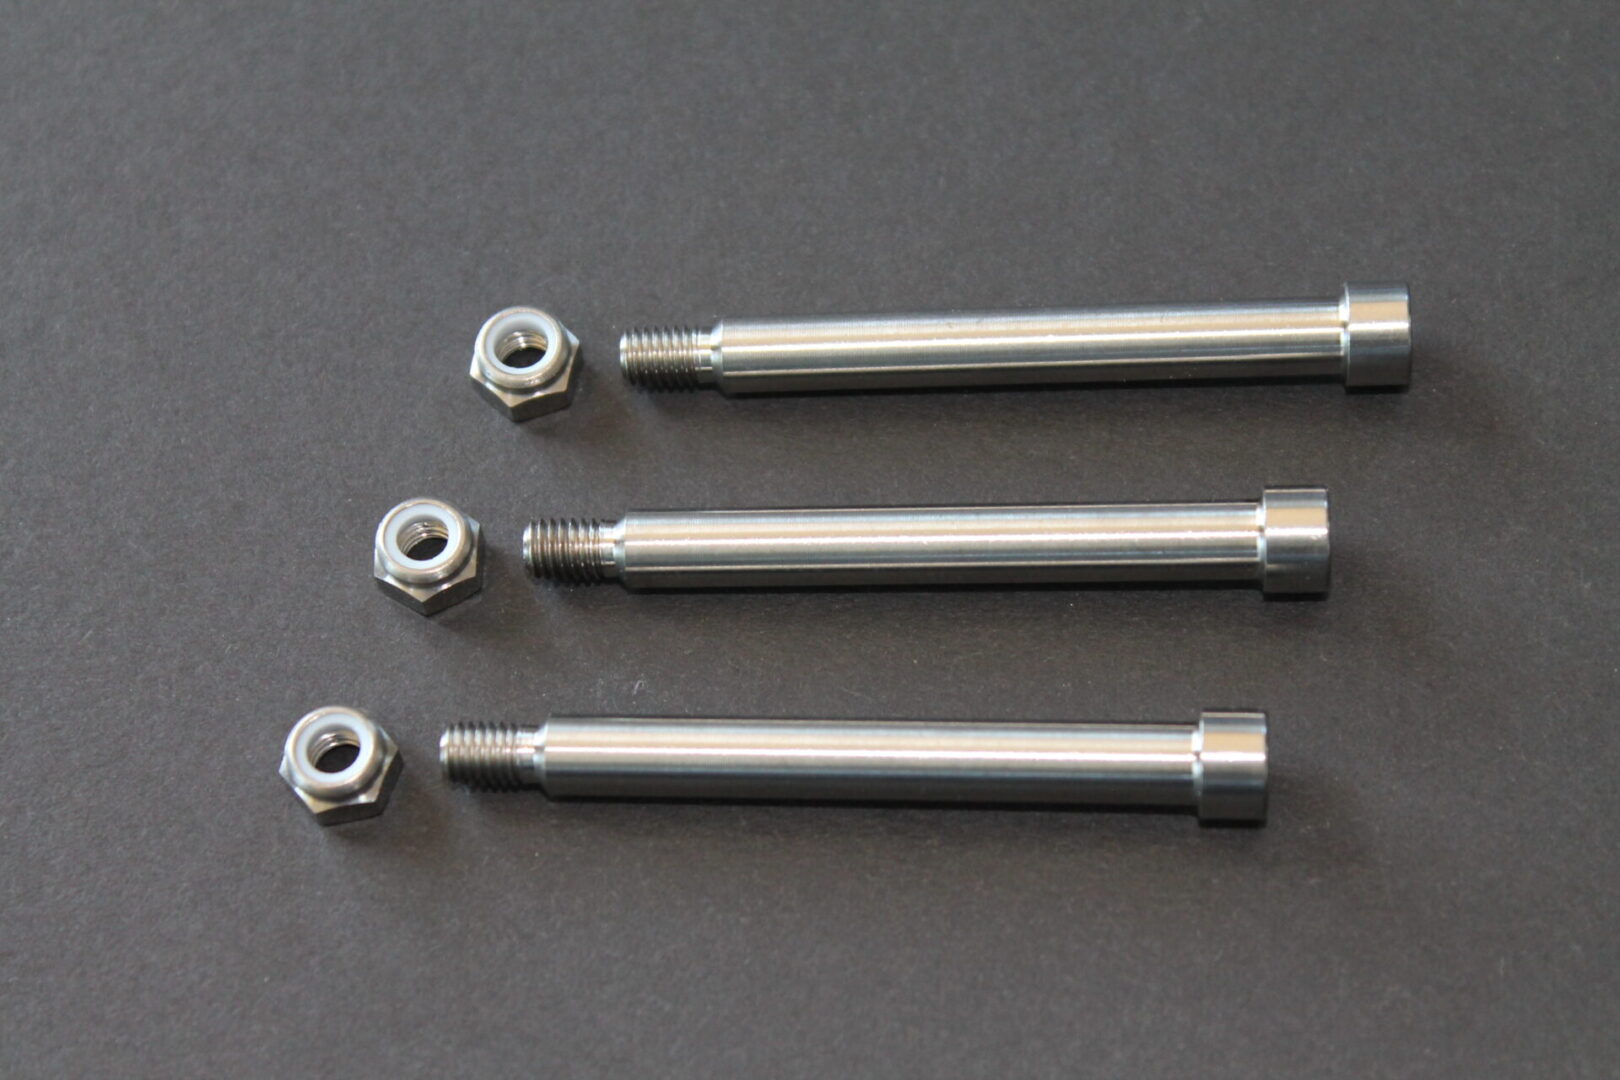 Four stainless steel bolts and nuts on a gray surface.